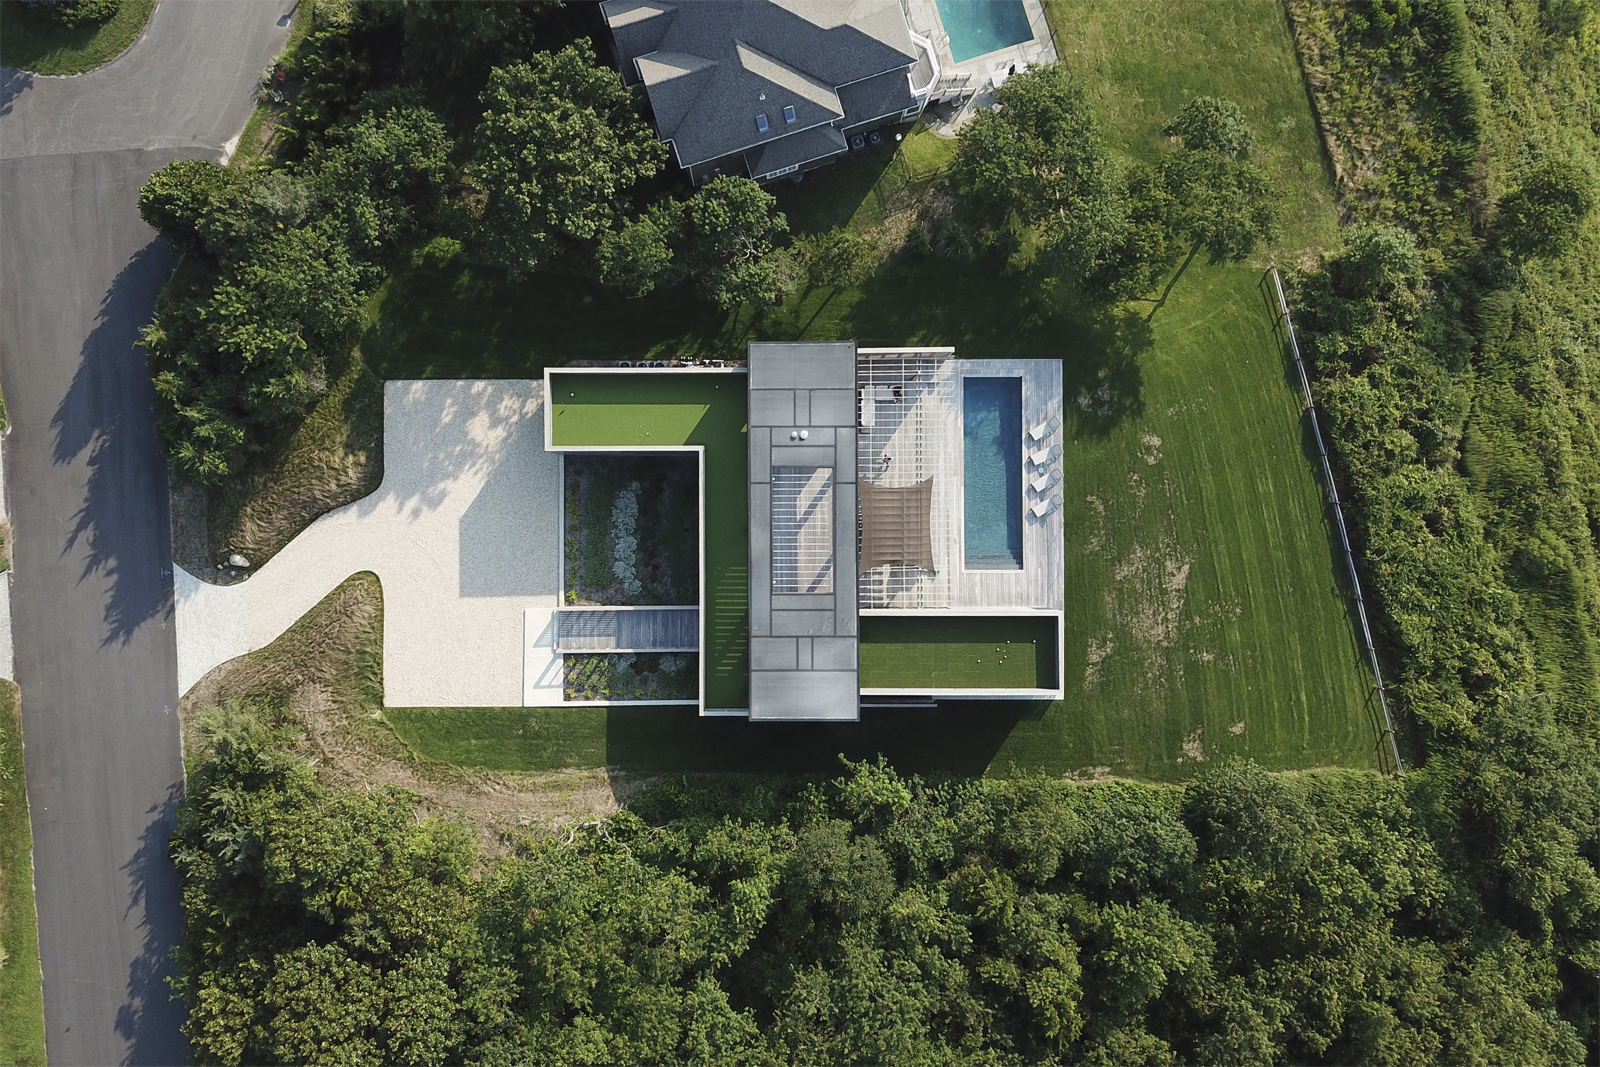 25-res4-resolution-4-architecture-modern-modular-house-prefab-home-north-fork-bluff-house-exterior-top-view-drone-shot.jpg